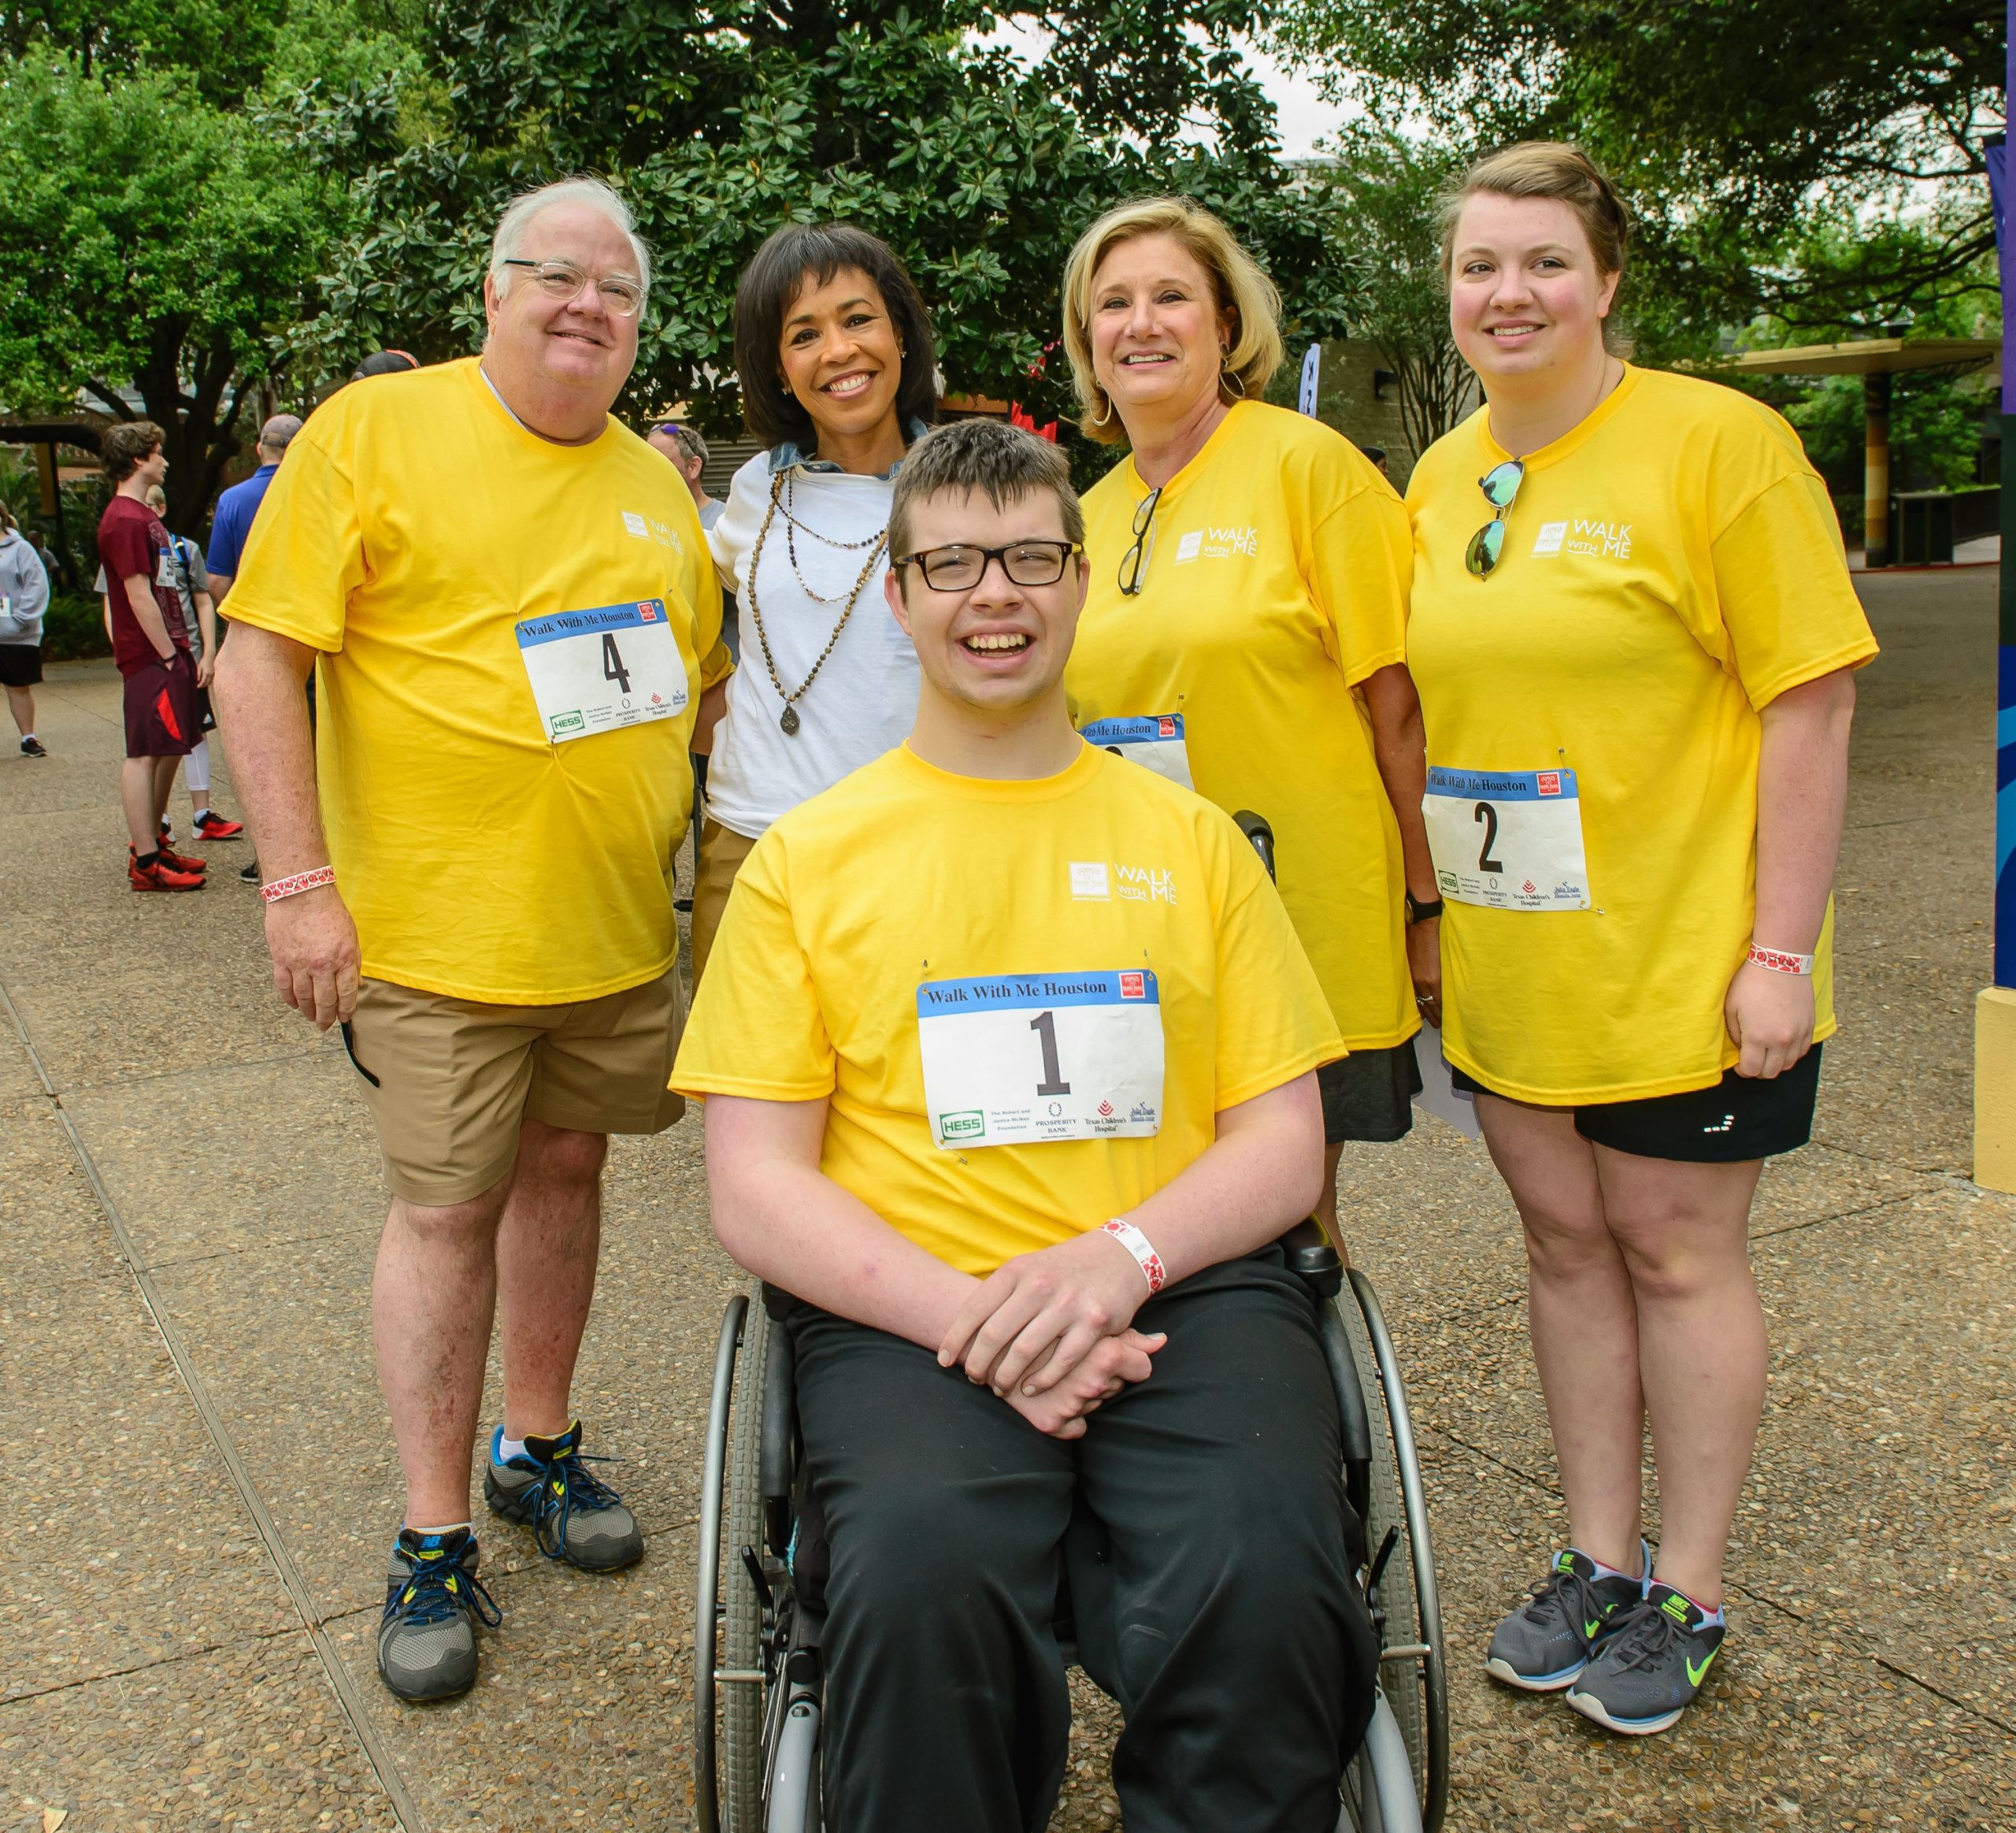 Dowdell Family and Gina Gaston at Walk With Me